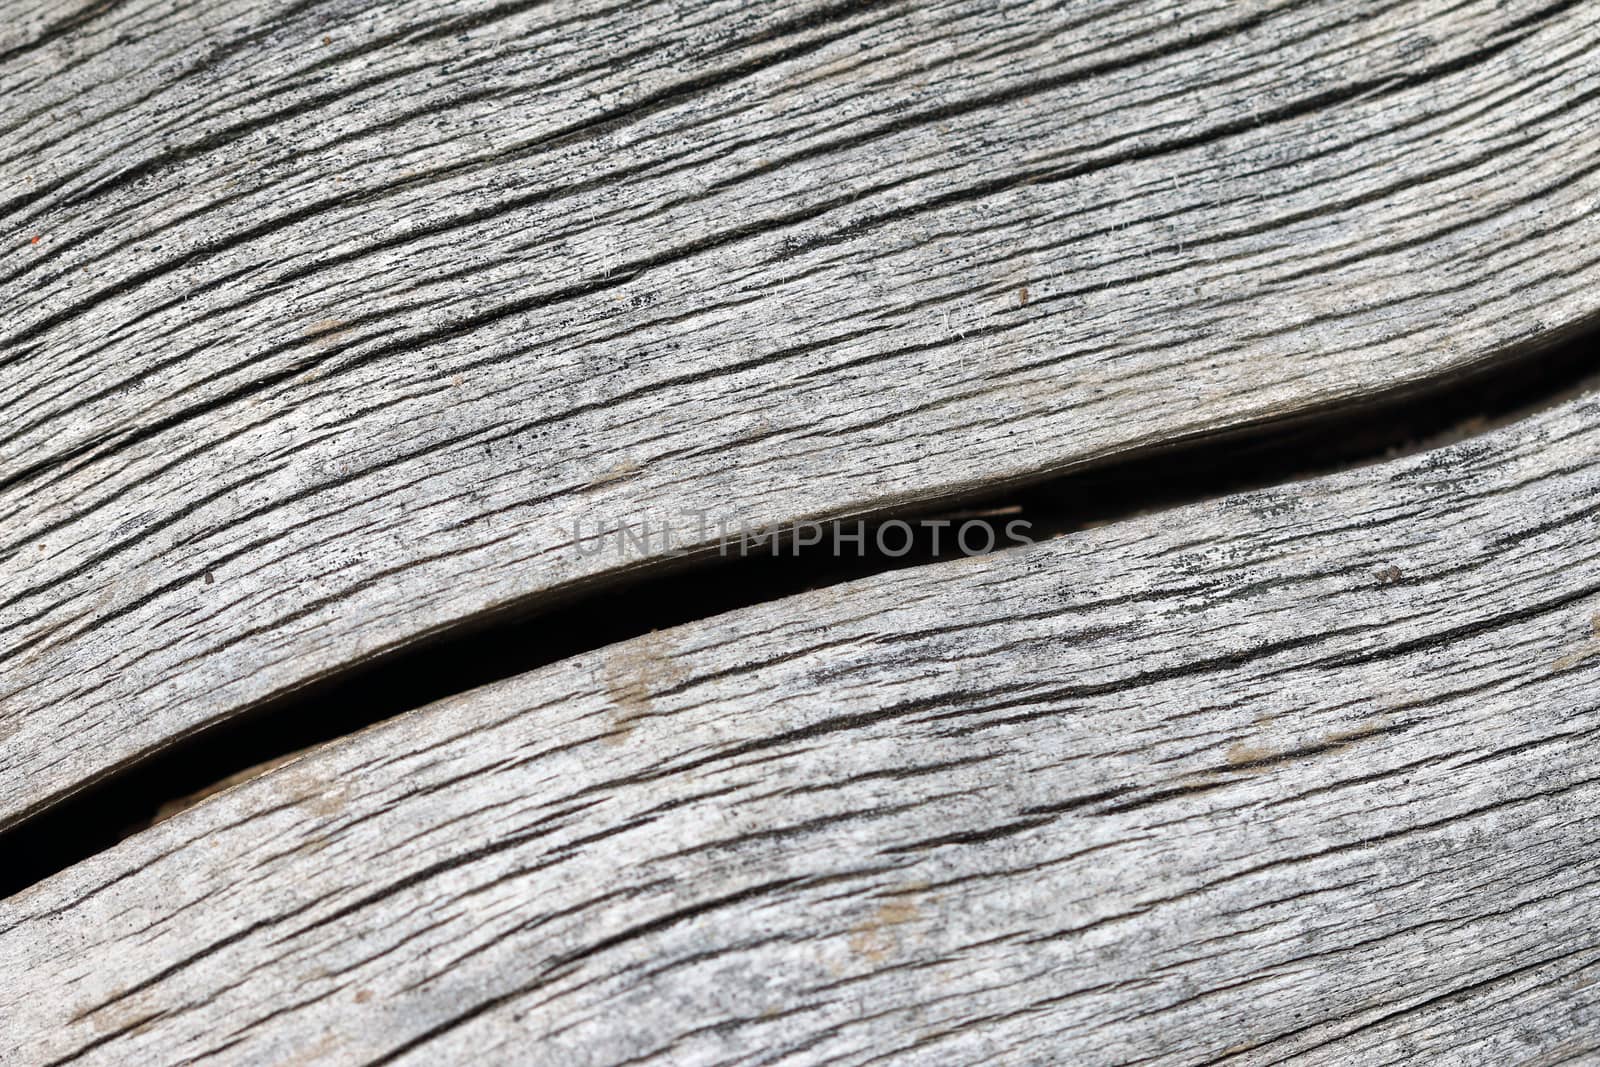 Detail of the crack in the wood